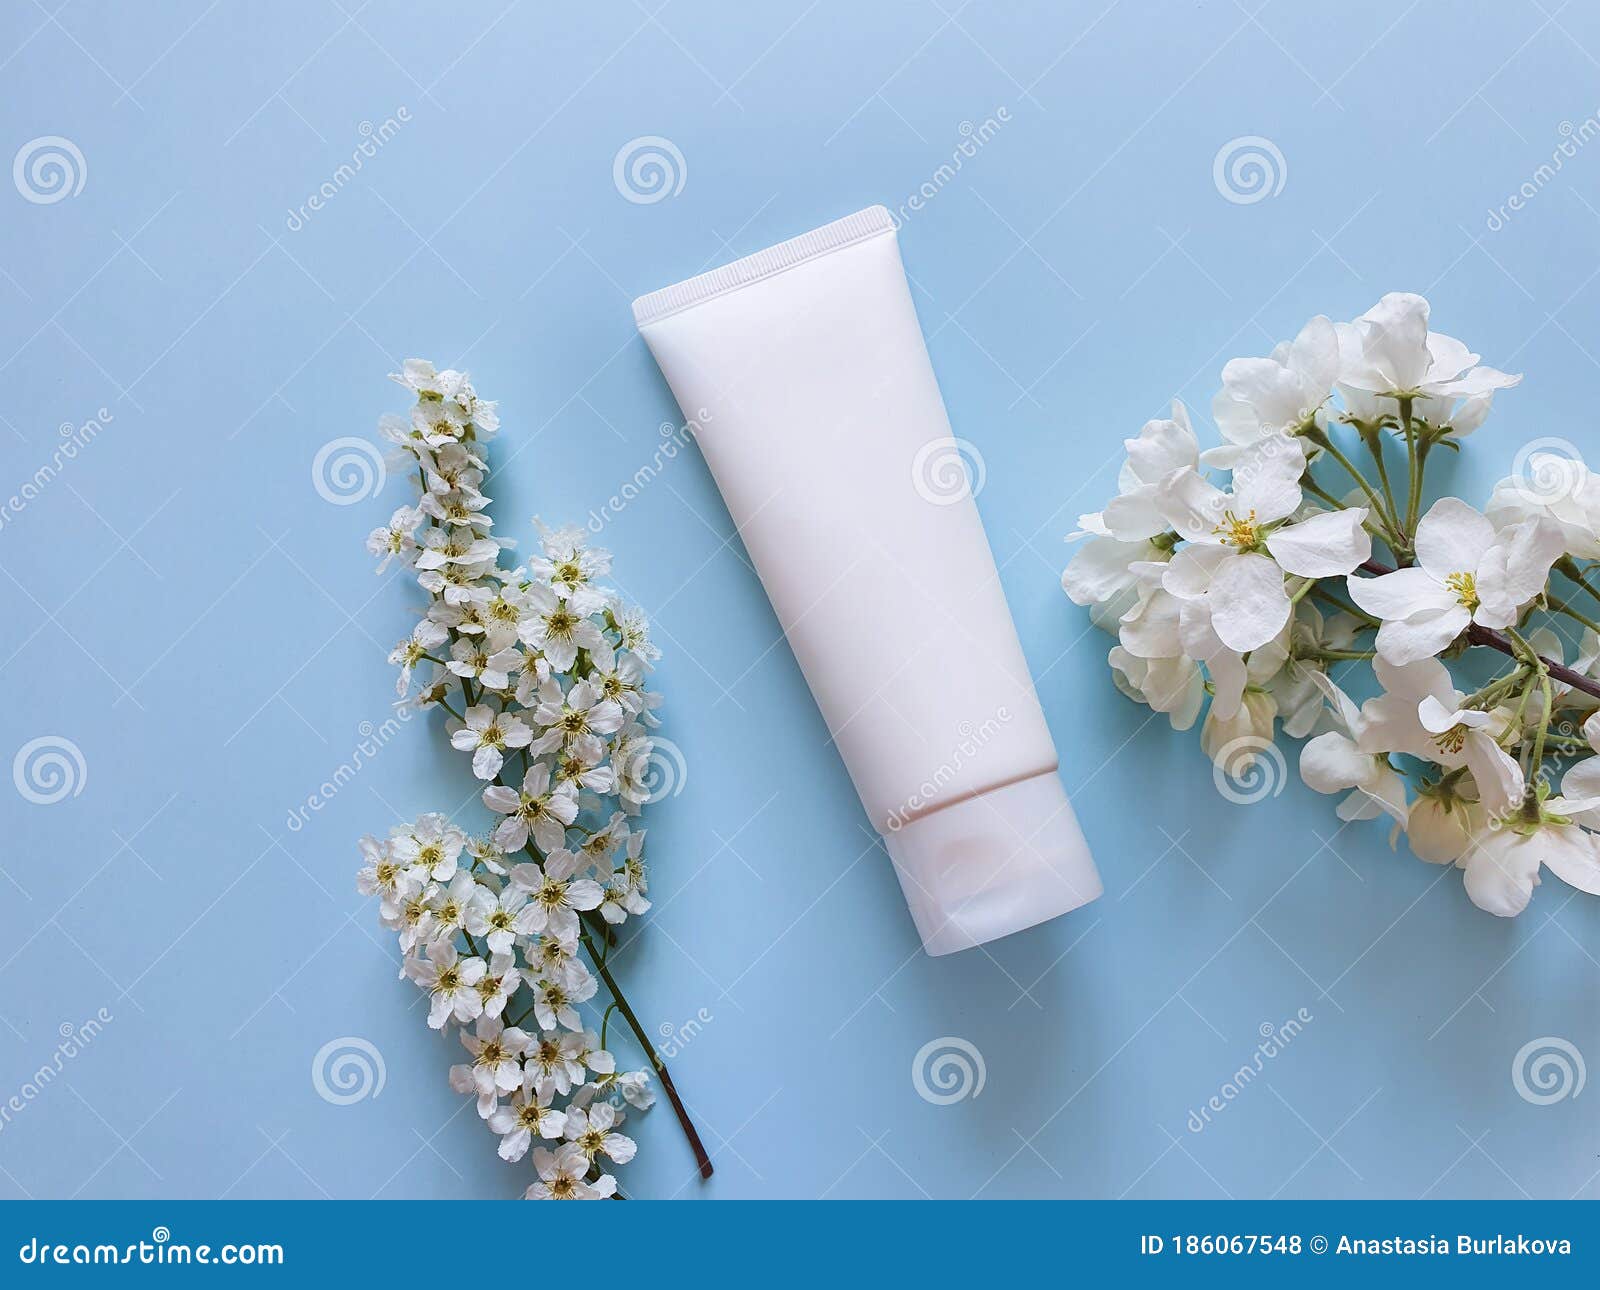 Download 3d Model / Mock Up Of A White Plastic Tube With Facial ...